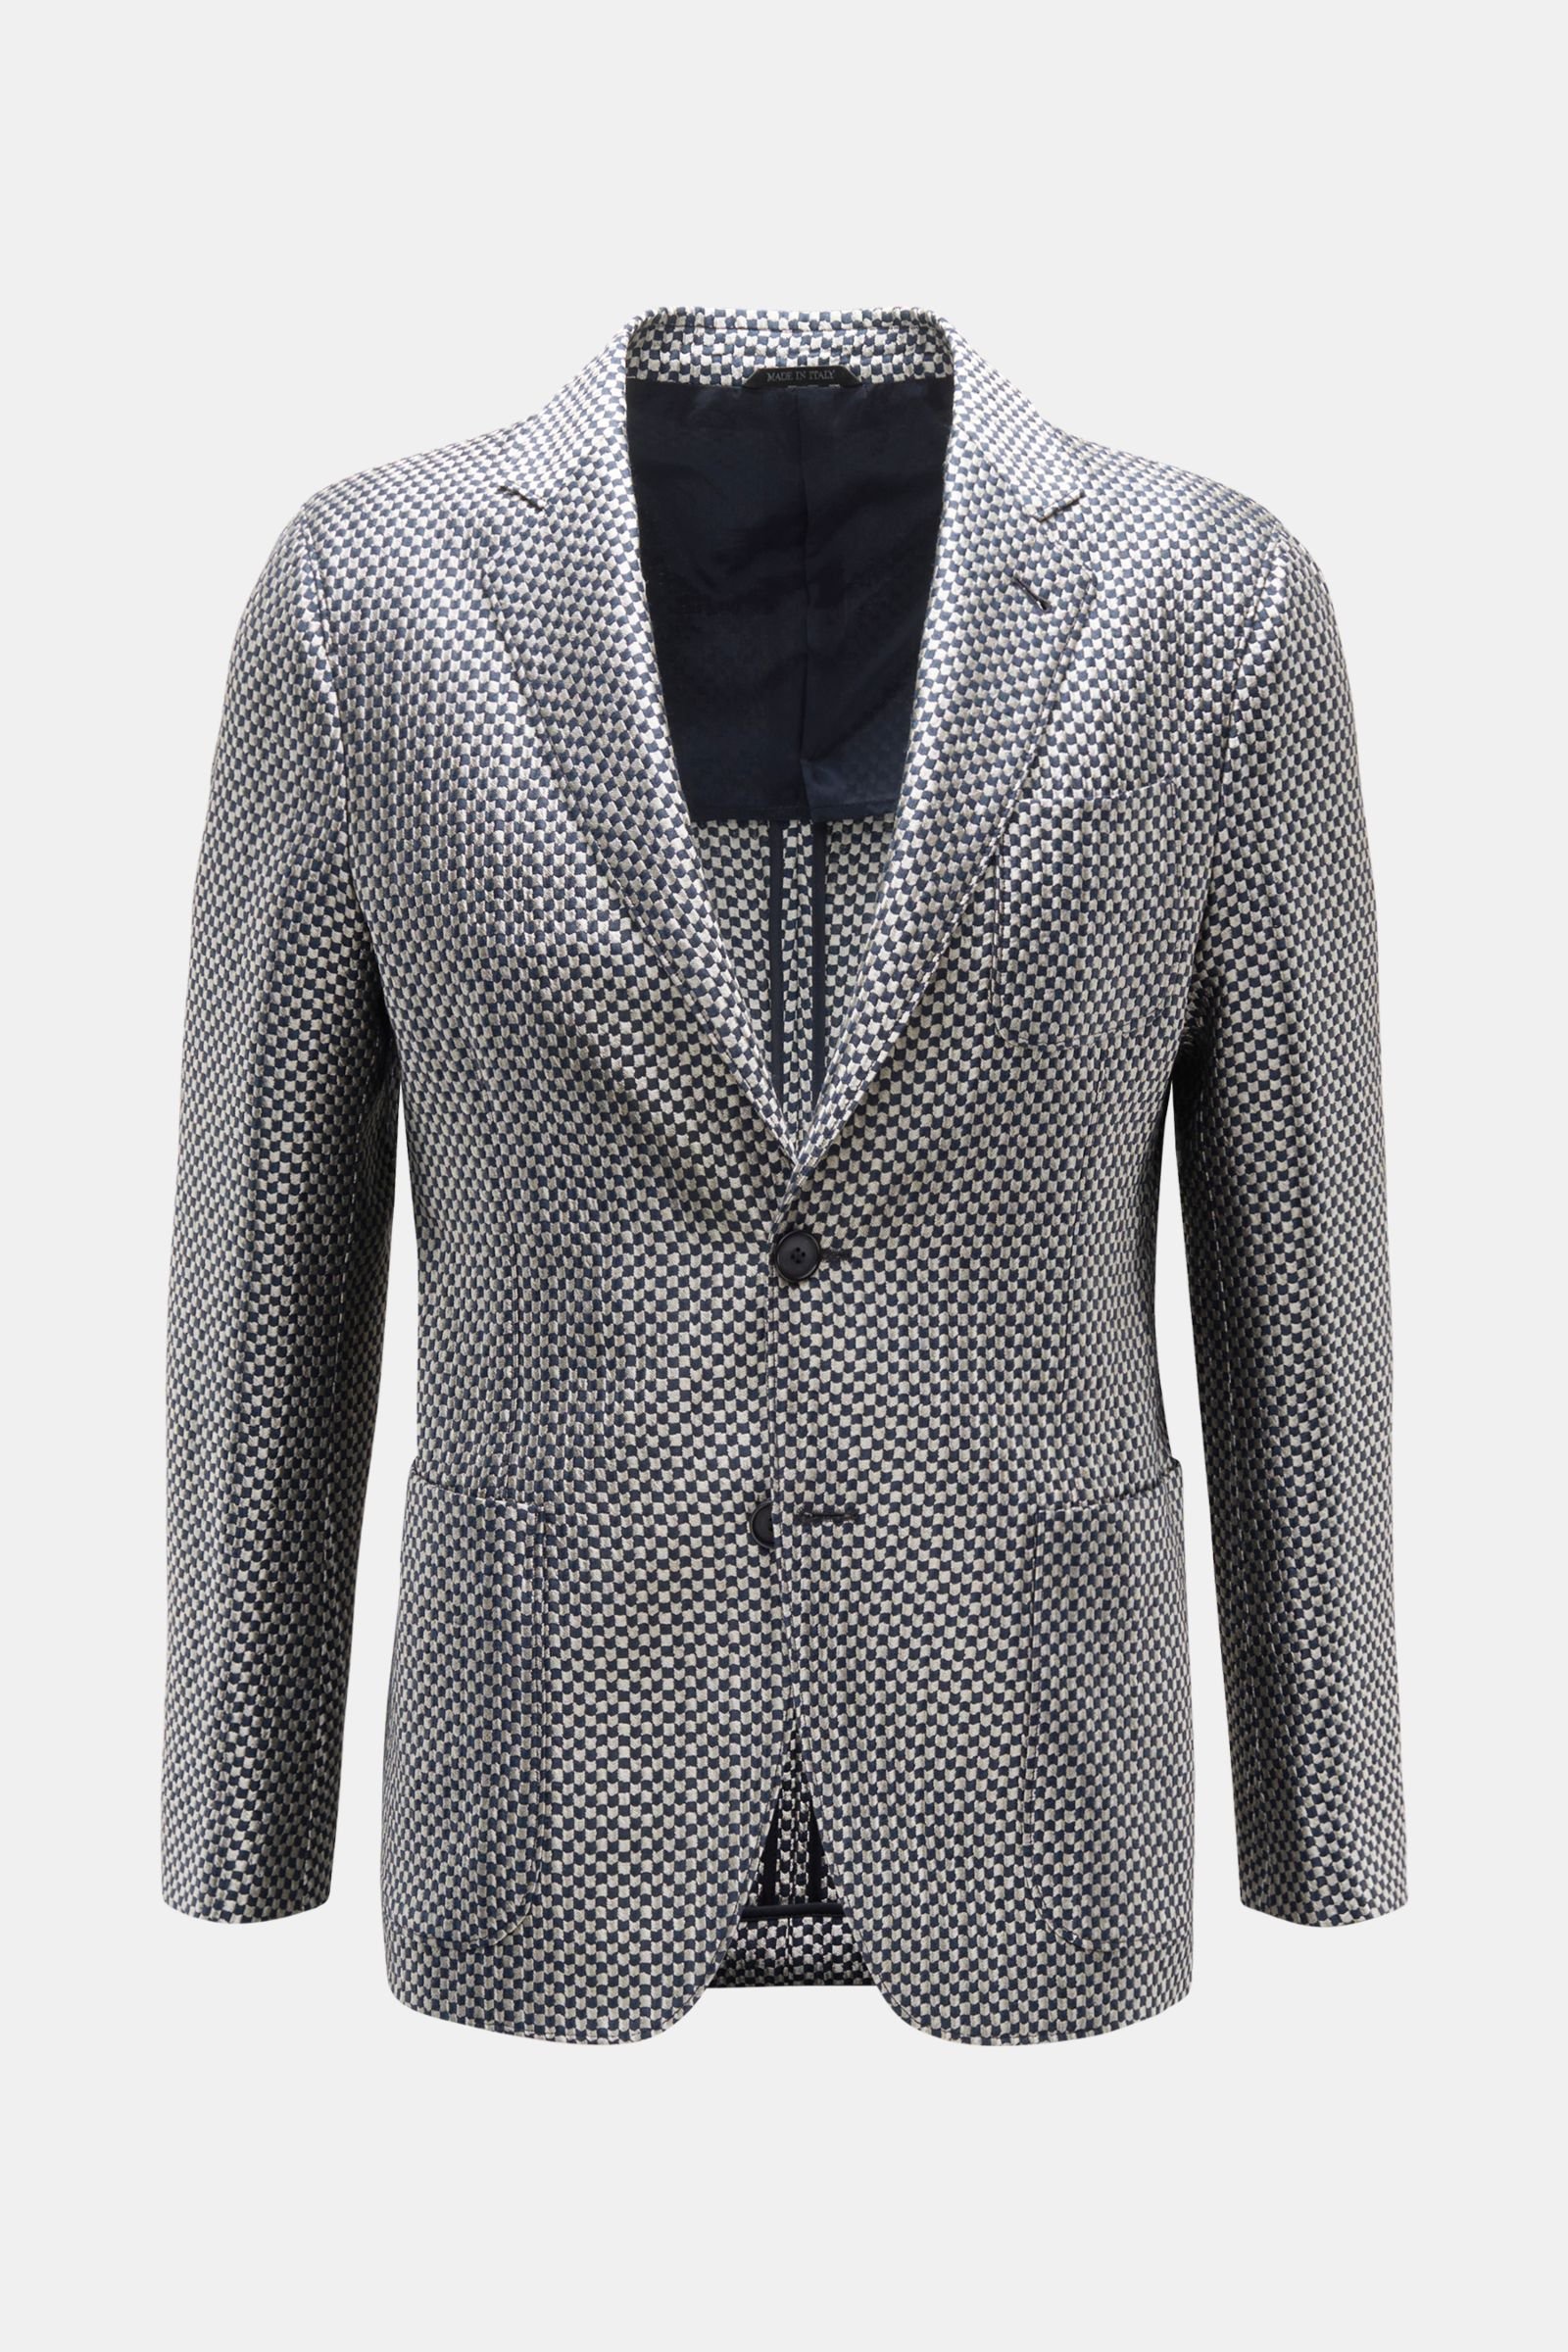 Smart-casual jacket 'Upton' navy/silver checked